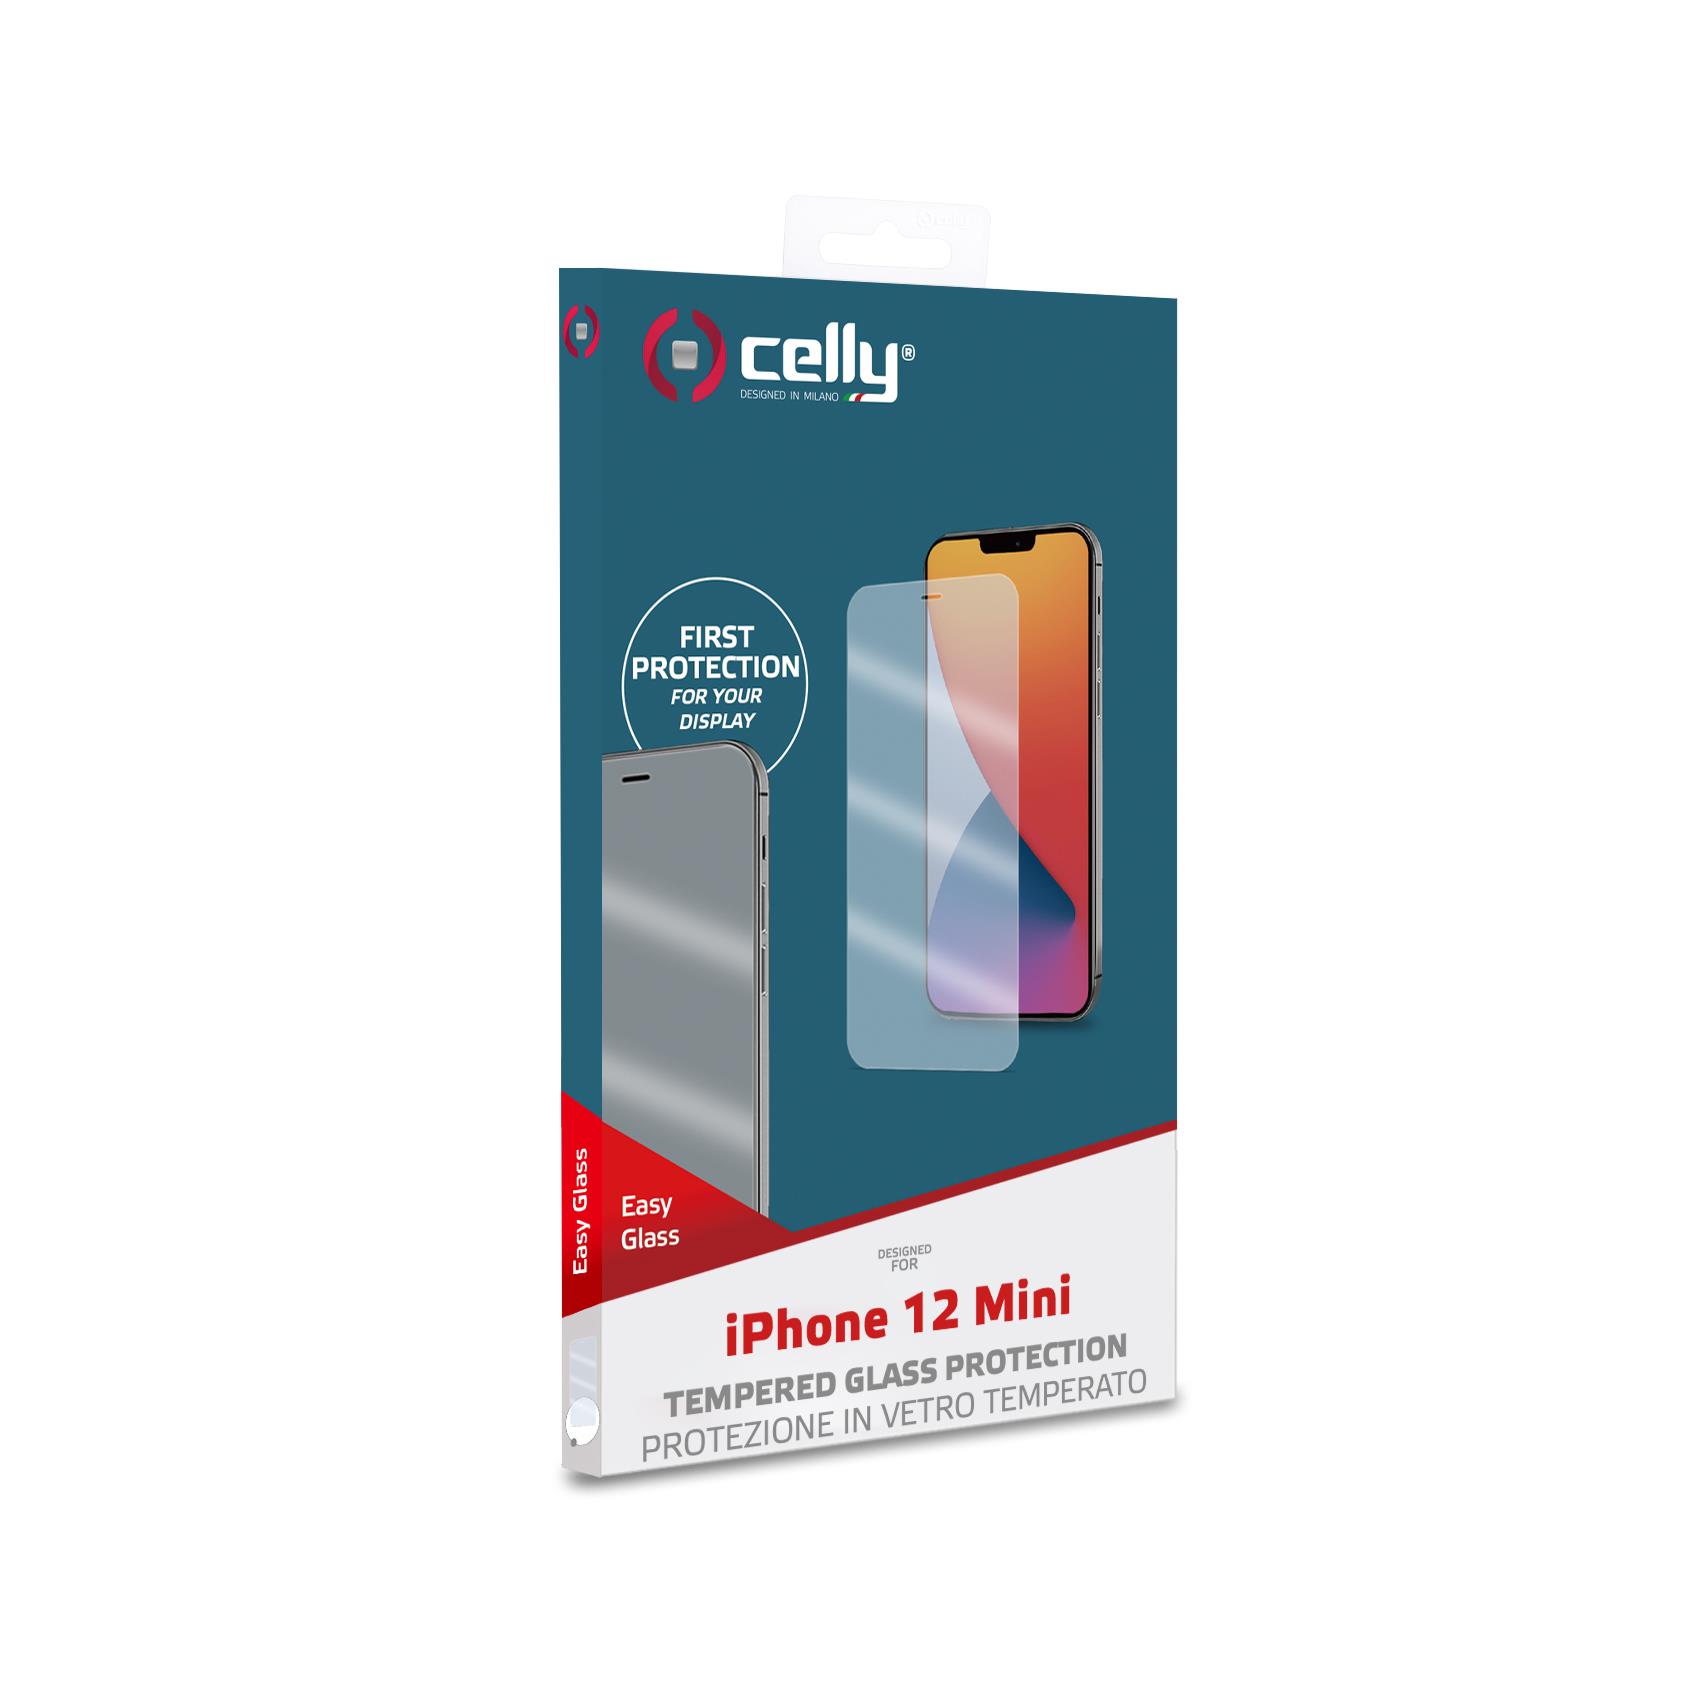 Easy Glass Iphone 12 Mini Celly Easy1003 8021735761211